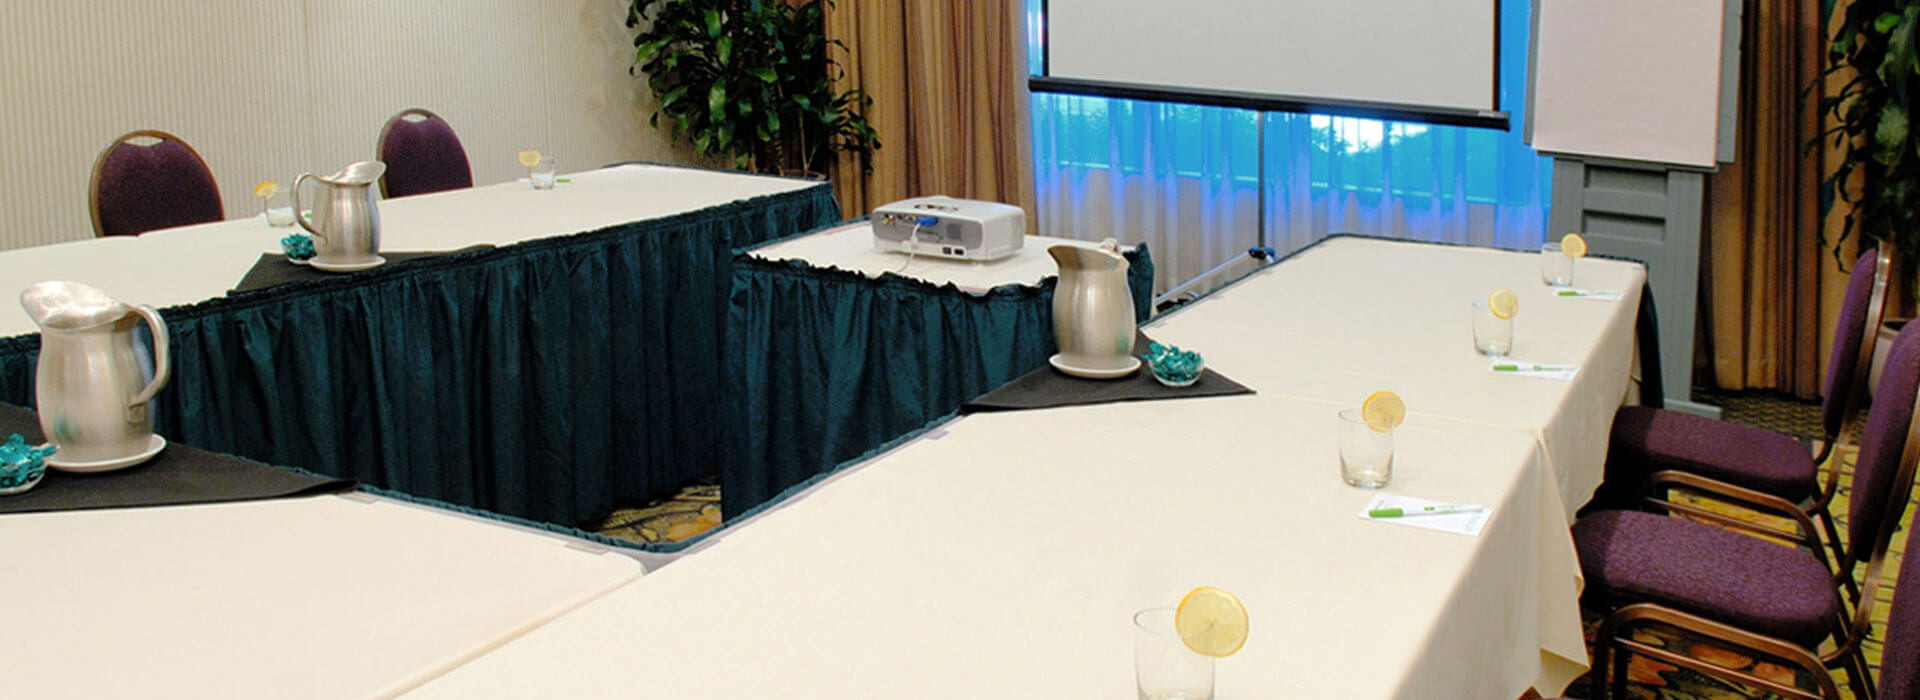 Conference and meeting room at Holiday Inn North Vancouver